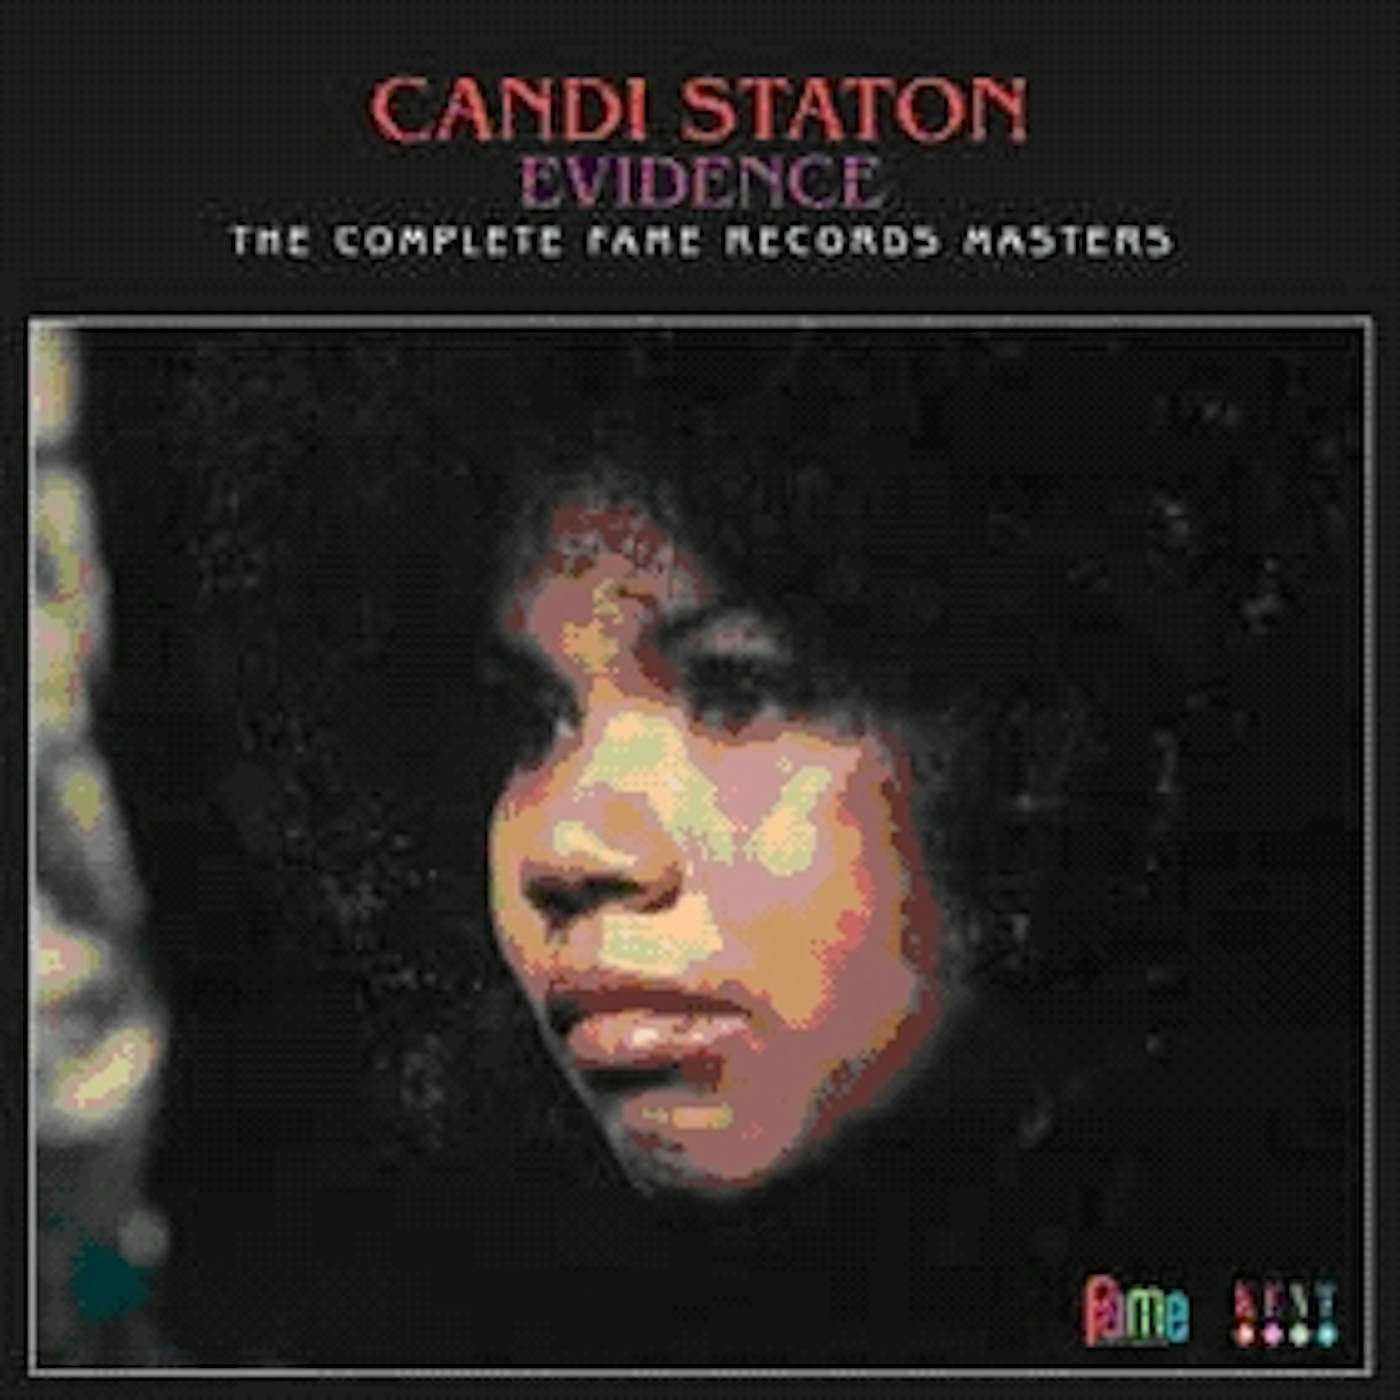 Candi Staton EVIDENCE: COMPLETE FAME RECORDS MASTERS CD